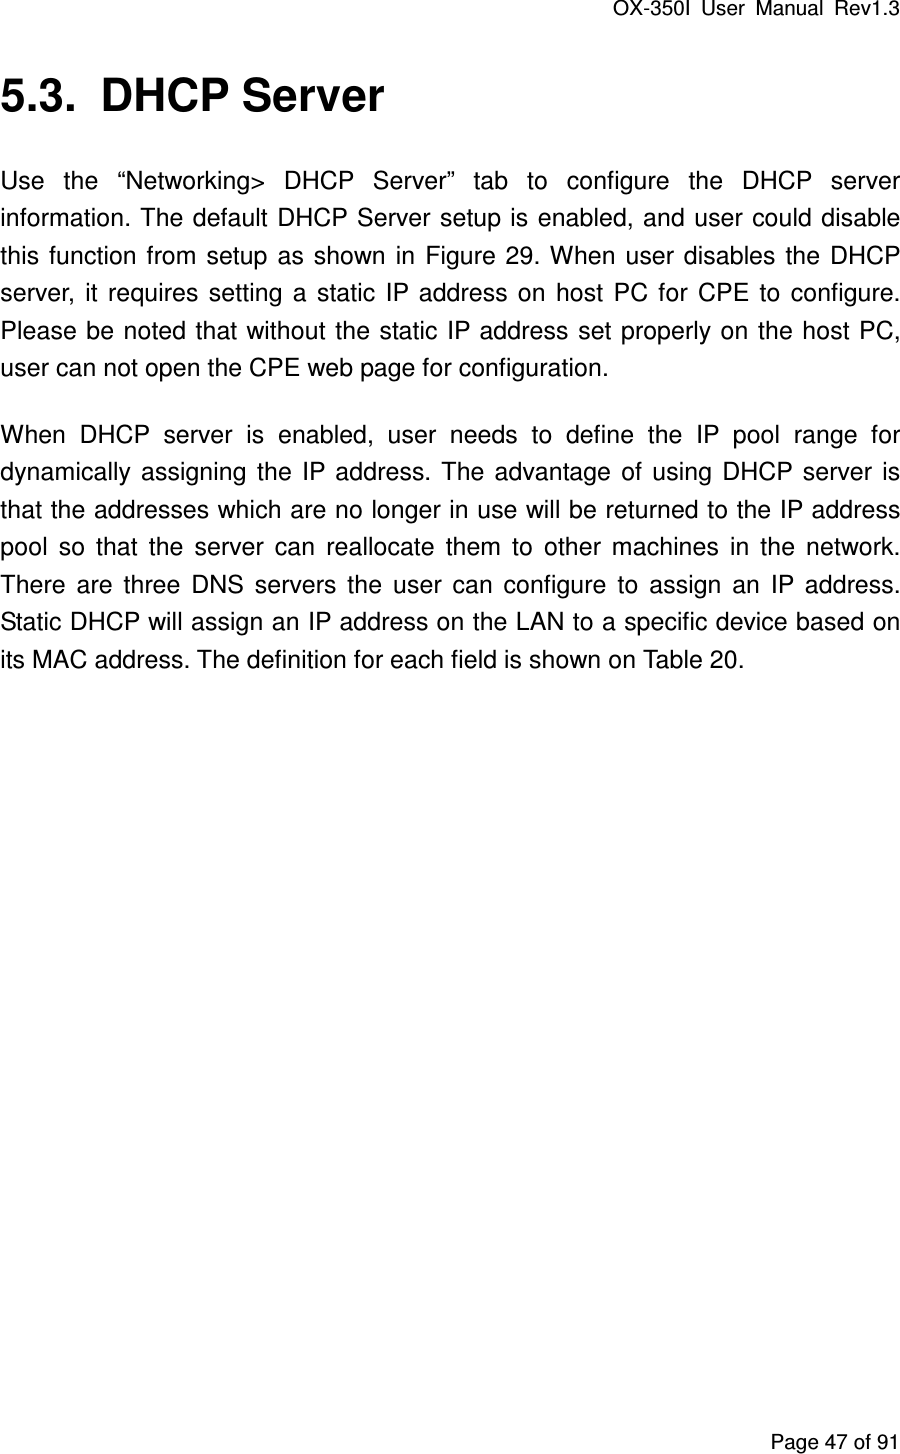 OX-350I  User  Manual  Rev1.3 Page 47 of 91 5.3.  DHCP Server Use  the  “Networking&gt;  DHCP  Server”  tab  to  configure  the  DHCP  server information. The default DHCP Server setup is enabled, and user could disable this function  from setup as shown in  Figure 29. When  user  disables  the  DHCP server,  it  requires  setting  a  static  IP address  on  host  PC  for  CPE  to  configure. Please be noted that without the static IP address set properly on the host PC, user can not open the CPE web page for configuration. When  DHCP  server  is  enabled,  user  needs  to  define  the  IP  pool  range  for dynamically  assigning  the  IP  address. The  advantage  of  using  DHCP  server  is that the addresses which are no longer in use will be returned to the IP address pool  so  that  the  server  can  reallocate  them  to  other  machines  in  the  network. There  are  three  DNS  servers  the  user  can  configure  to  assign  an  IP  address. Static DHCP will assign an IP address on the LAN to a specific device based on its MAC address. The definition for each field is shown on Table 20. 